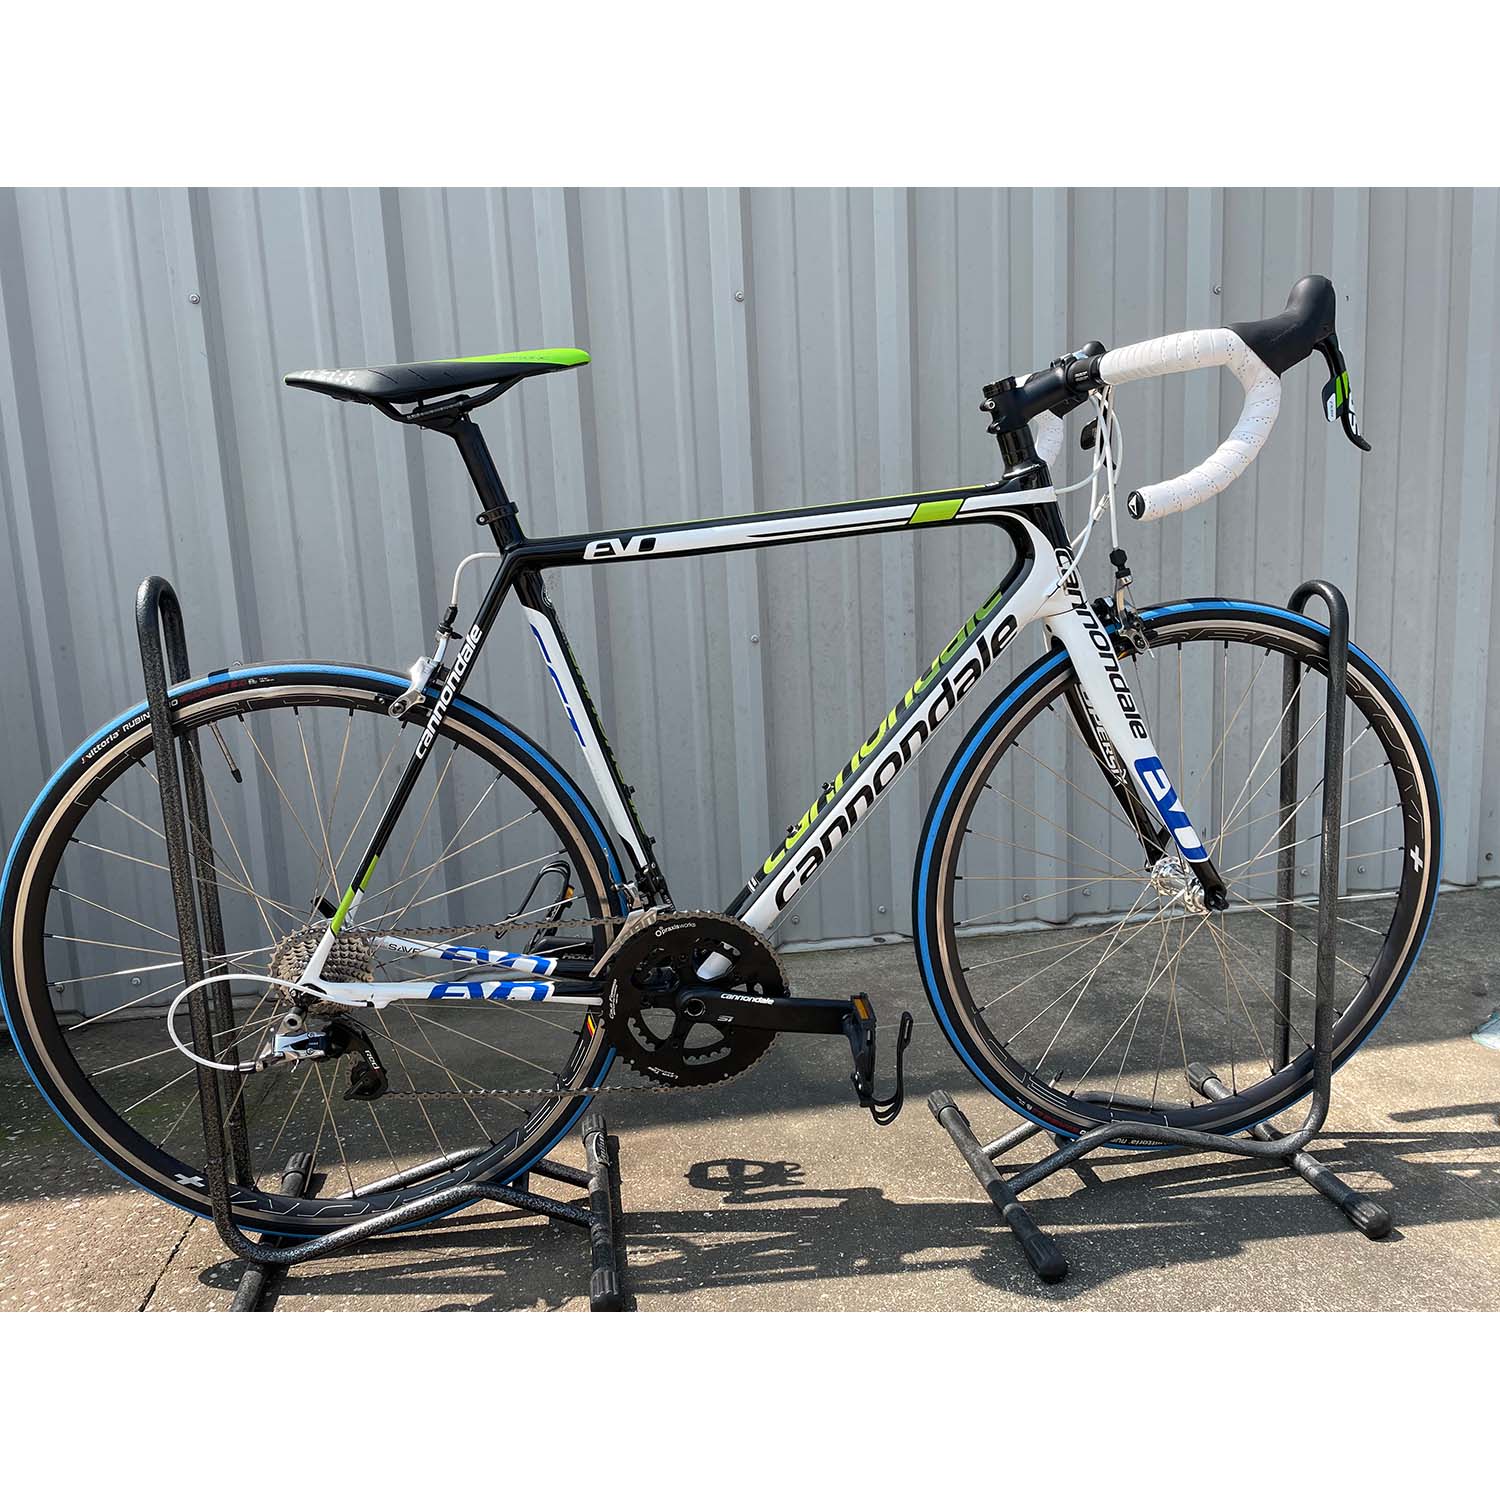 Pre-Owned Cannondale EVO Supersix with power meter- 56cm – Bixby 